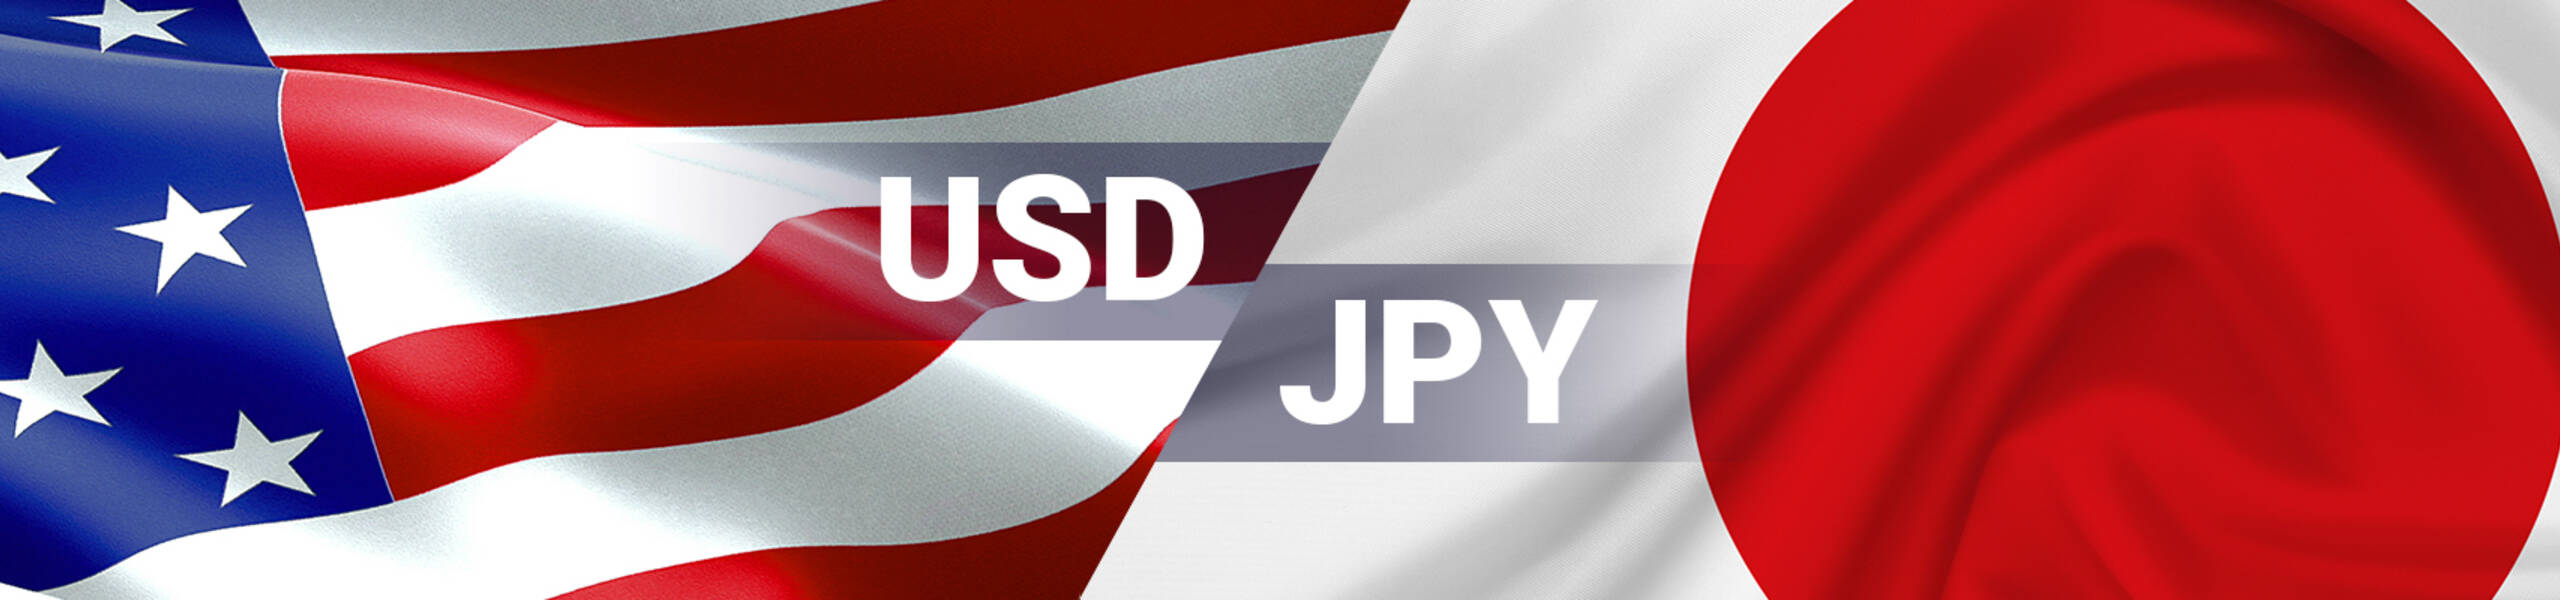 USD/JPY Dailyレポート 2017/09/05